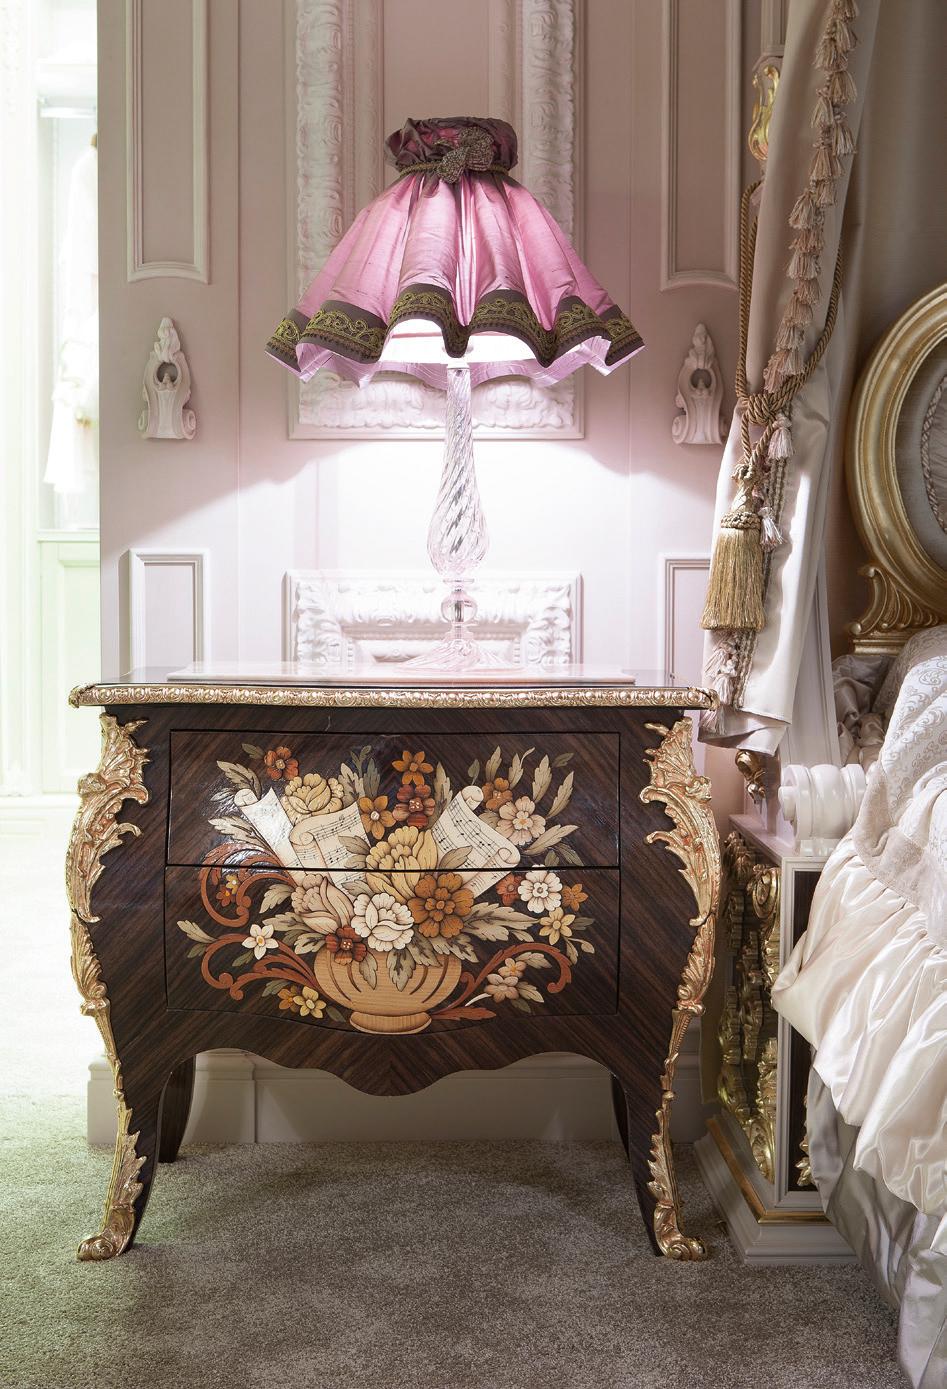 The ornamental quality of this hand painted baroque night stand is truly astonishing. The high-end wood veneer, the baroque carvings completely decorated with gold leaf and the curved lines are such a match with baroque bedrooms including beds,